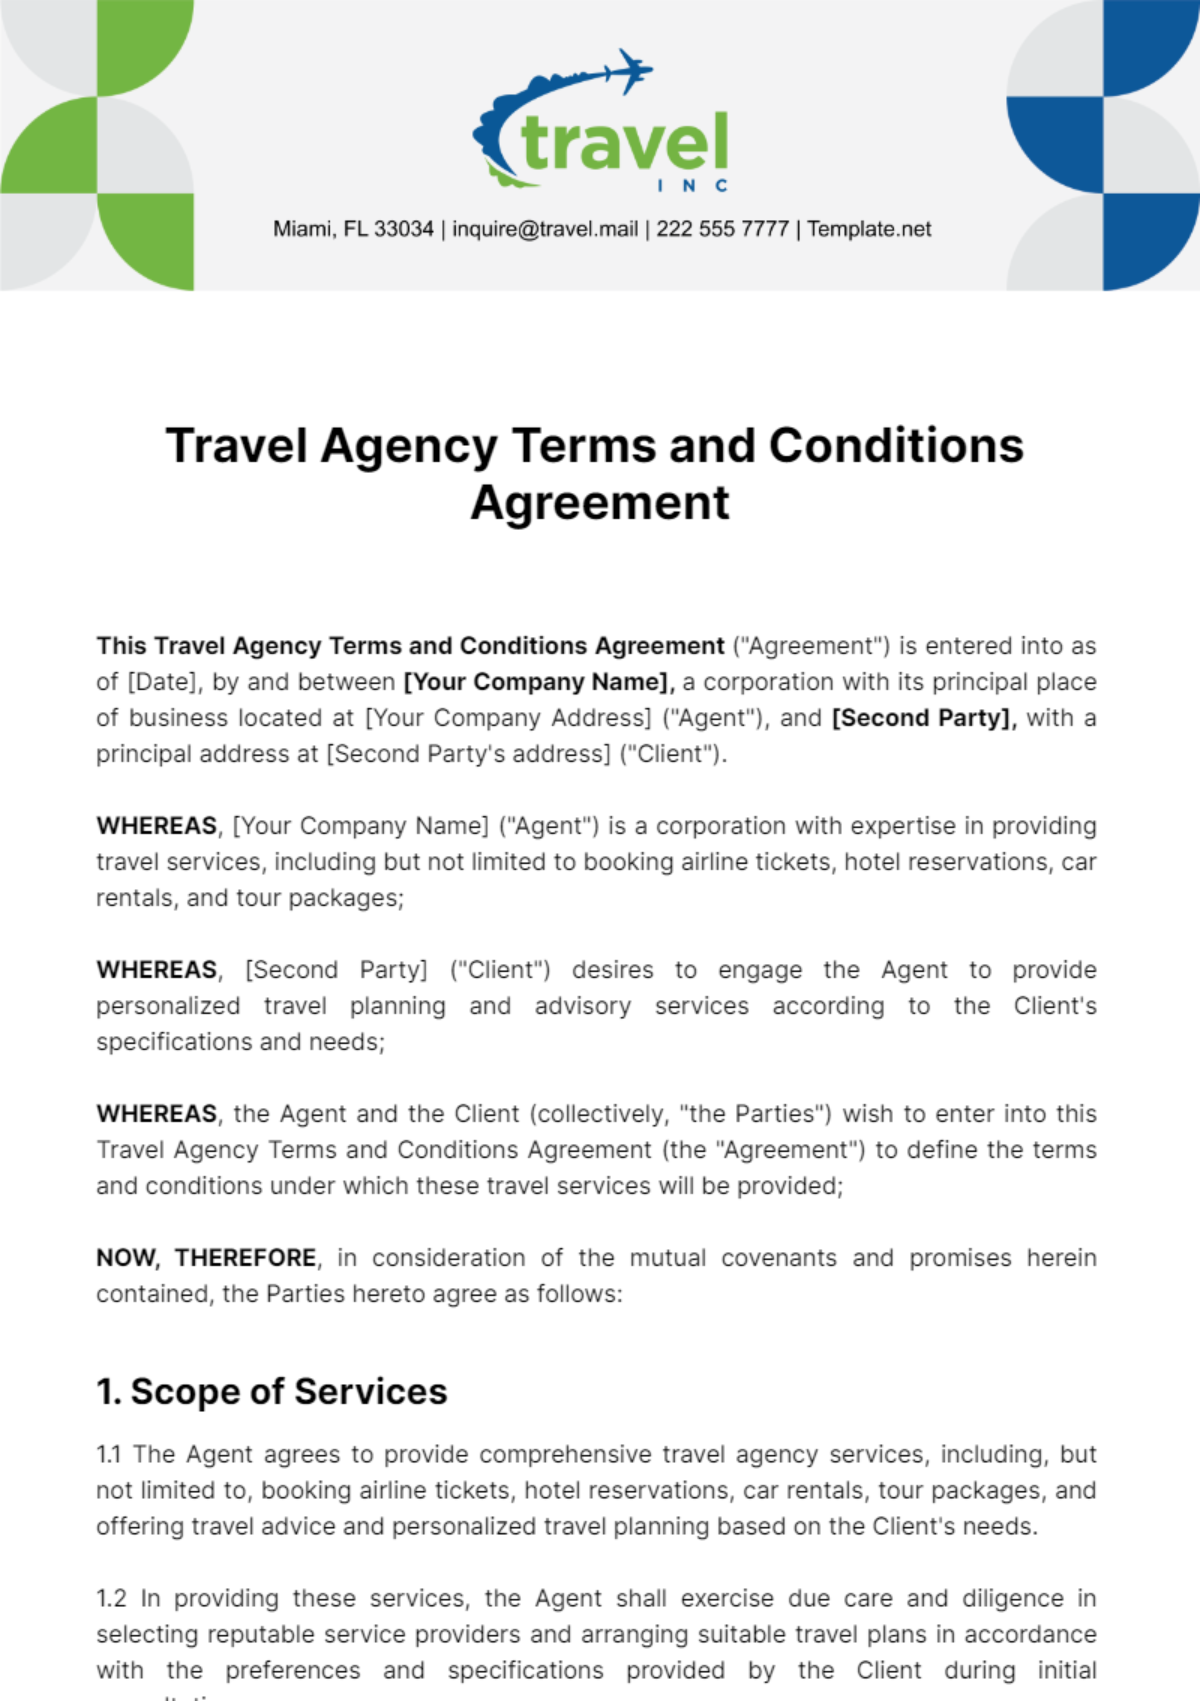 Travel Agency Terms and Conditions Agreement Template